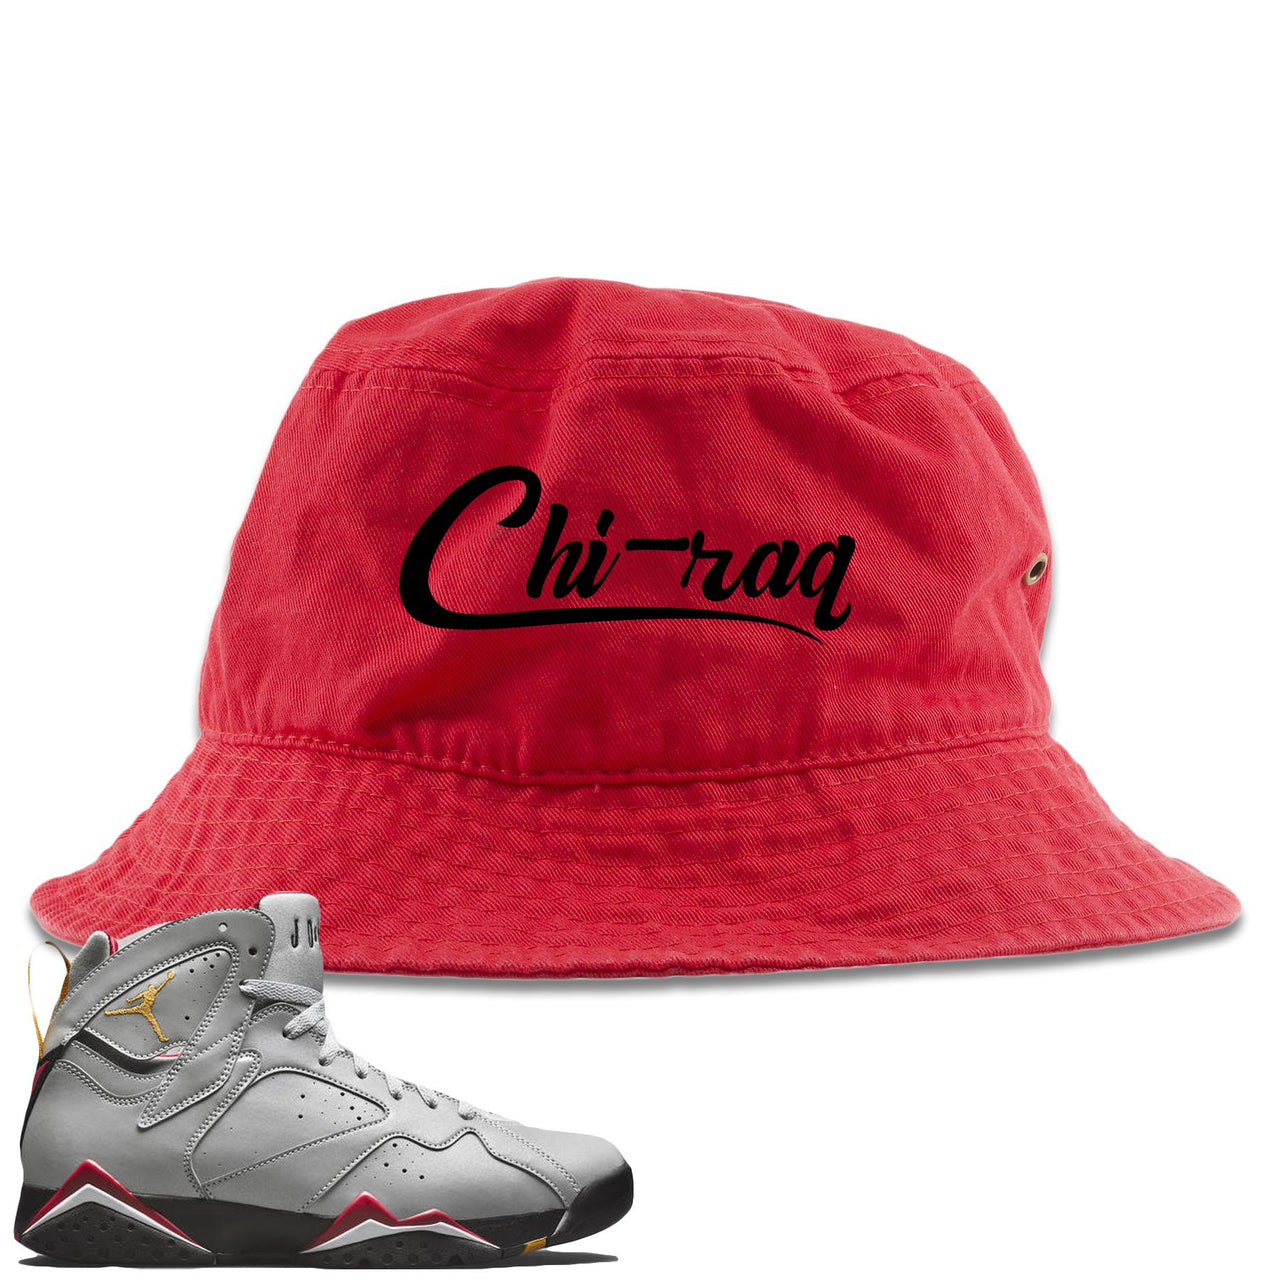 Reflections of a Champion 7s Bucket Hat | Chiraq Script, Red